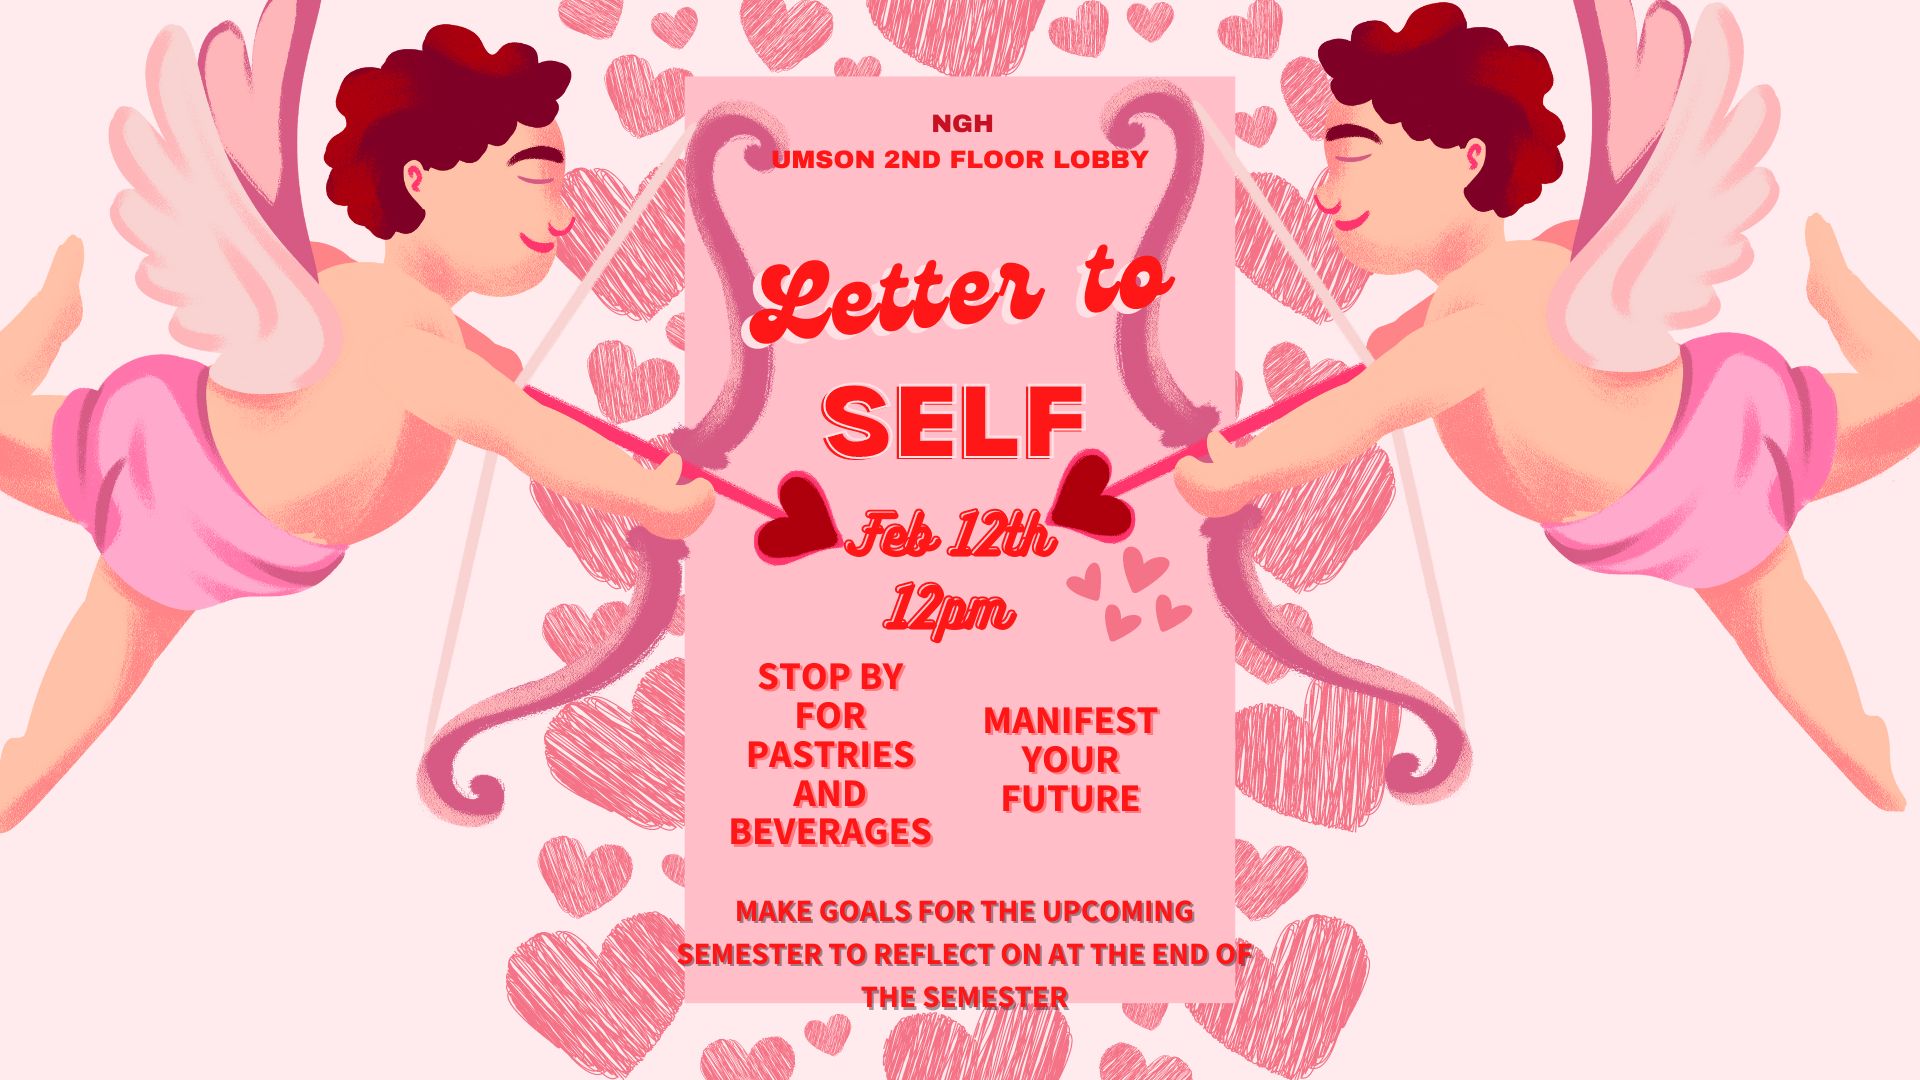 NGH, UMSON 2nd Floor Lobby, Letter to Self, Feb 12th, 12 pm, Stop by for pastries and beverages, Manifest your future, Makes goals for the upcoming semester to reflect on at the end of the semester